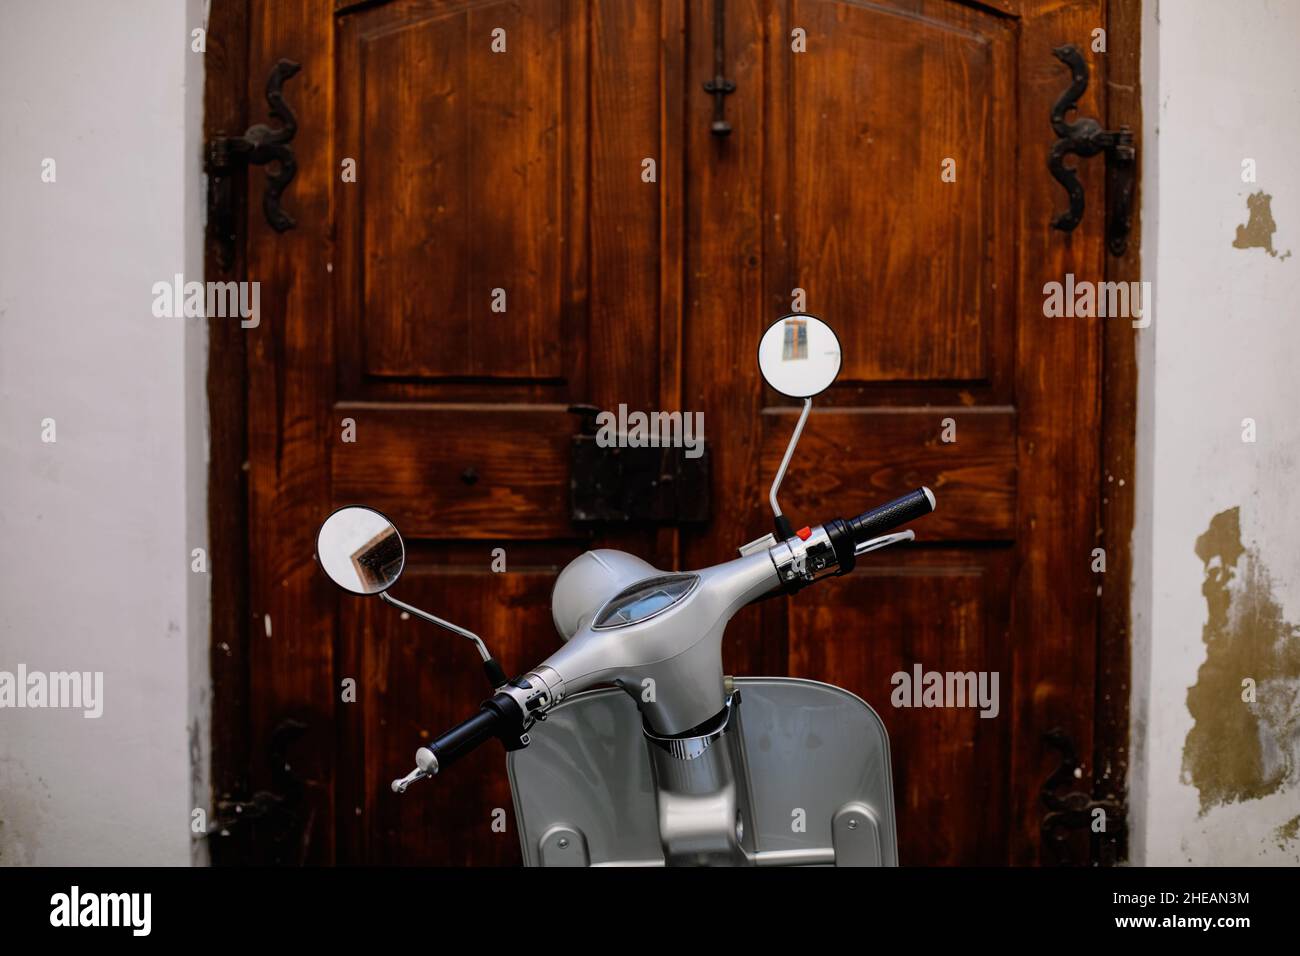 Shallow depth of field (selective focus) details with a scooter with a wooden door in the background. Stock Photo